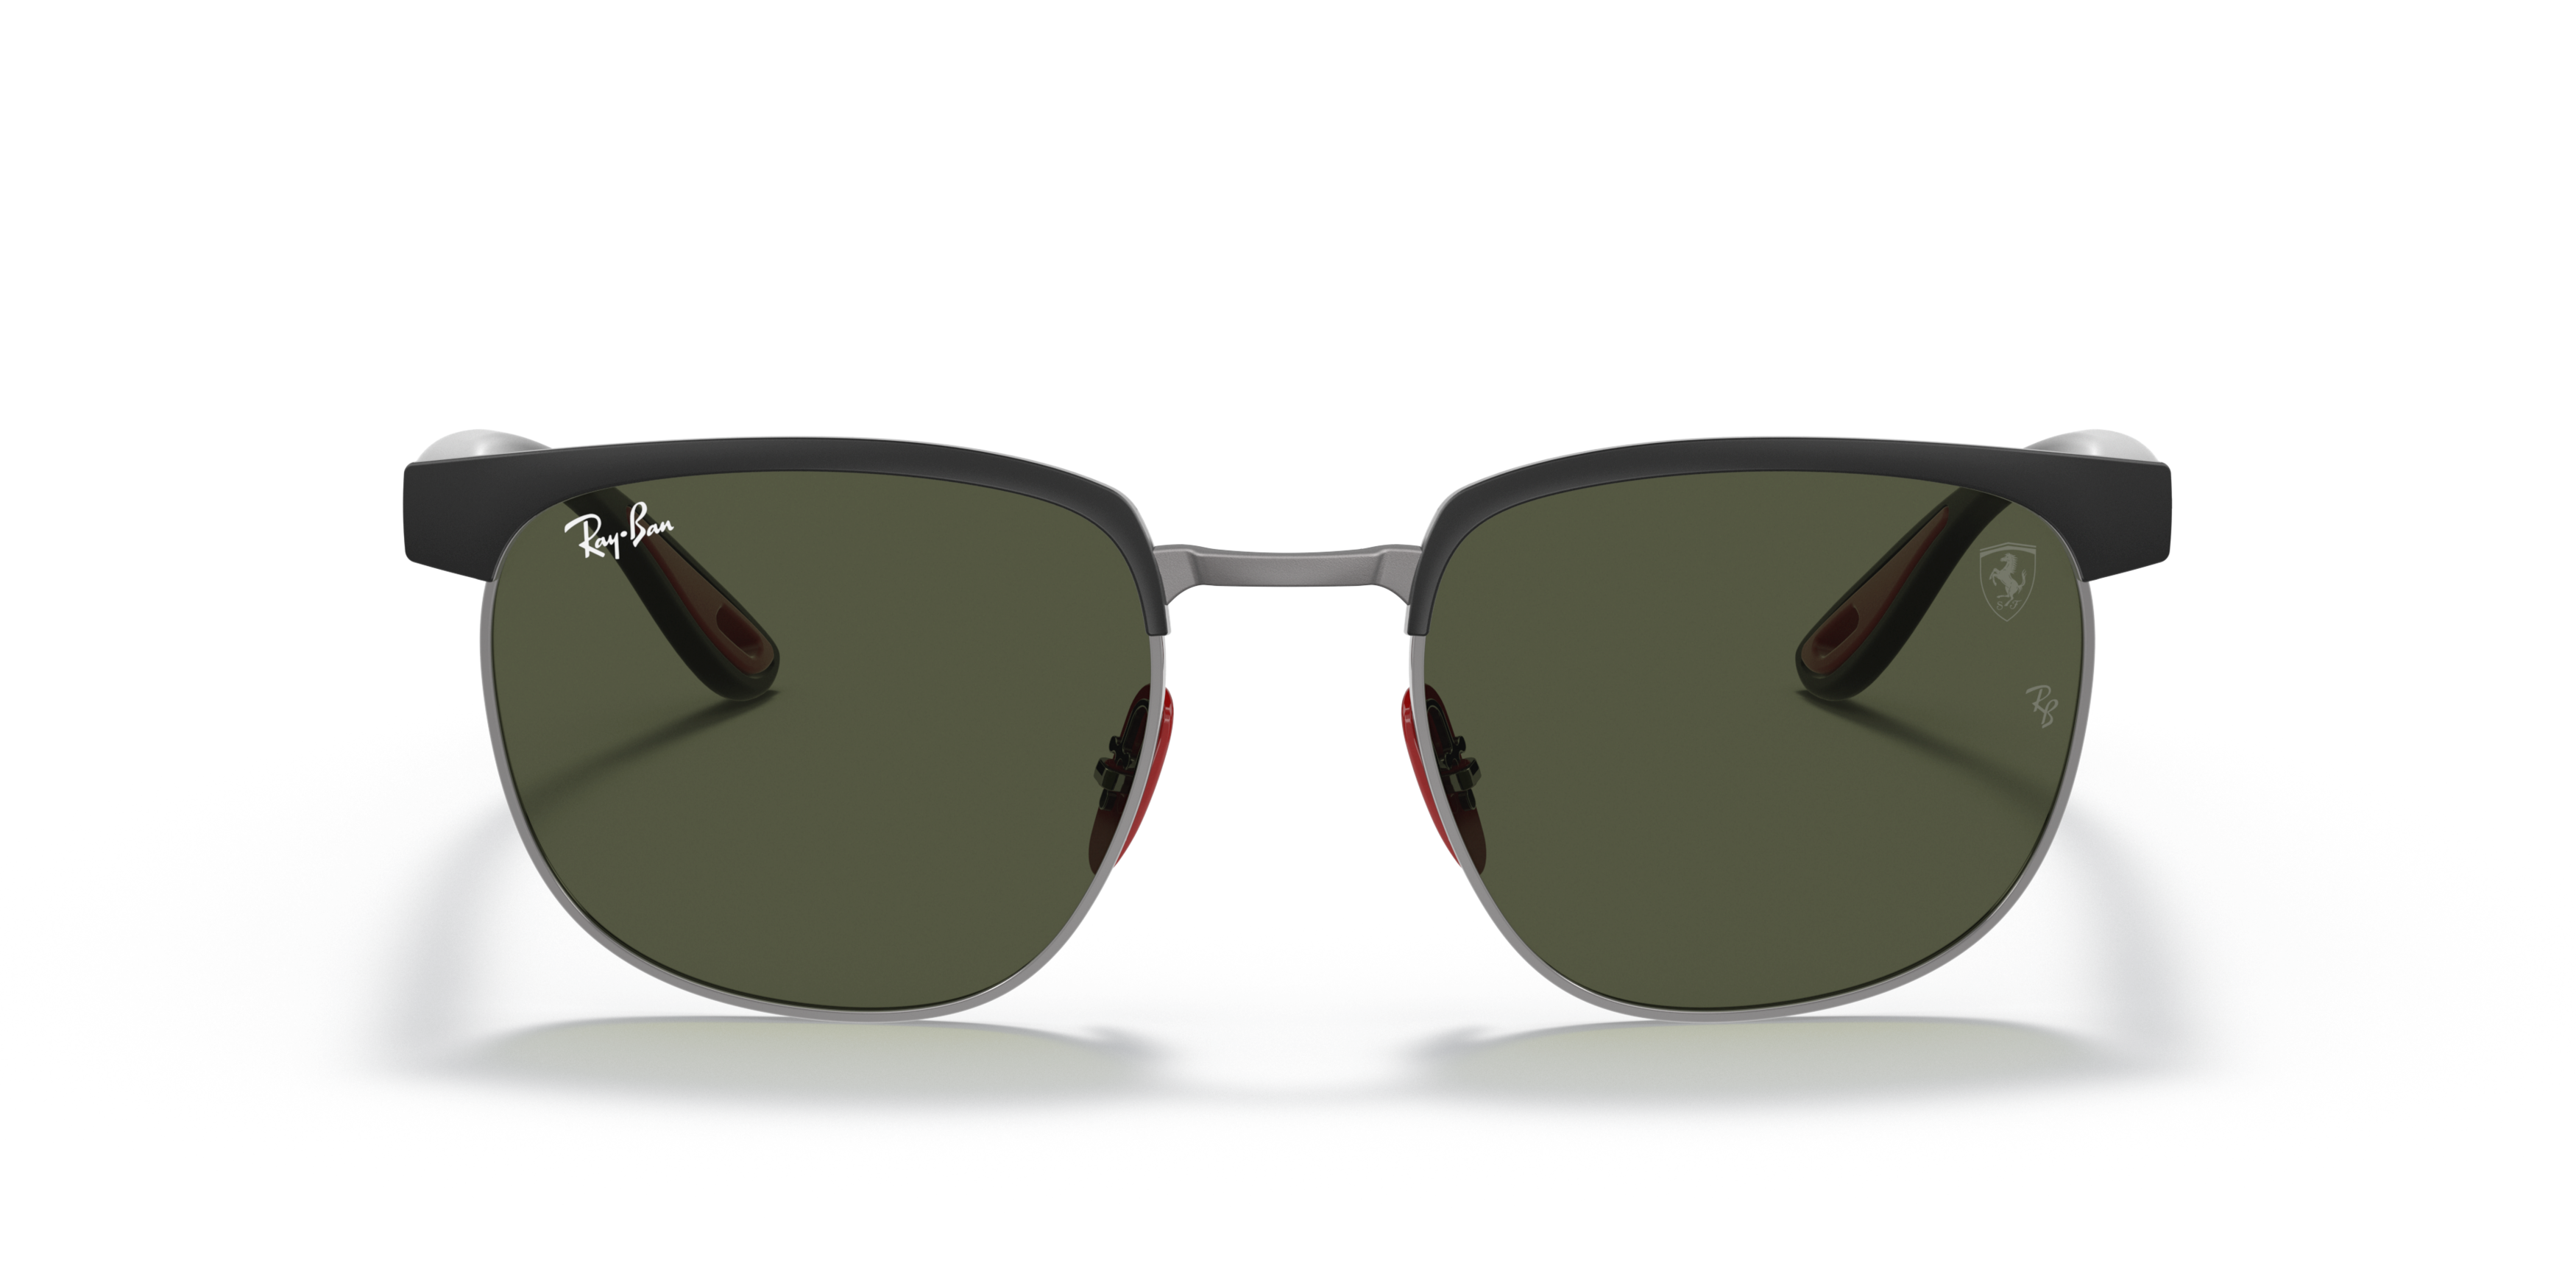 [products.image.front] Ray-Ban 0RB3698M F07331